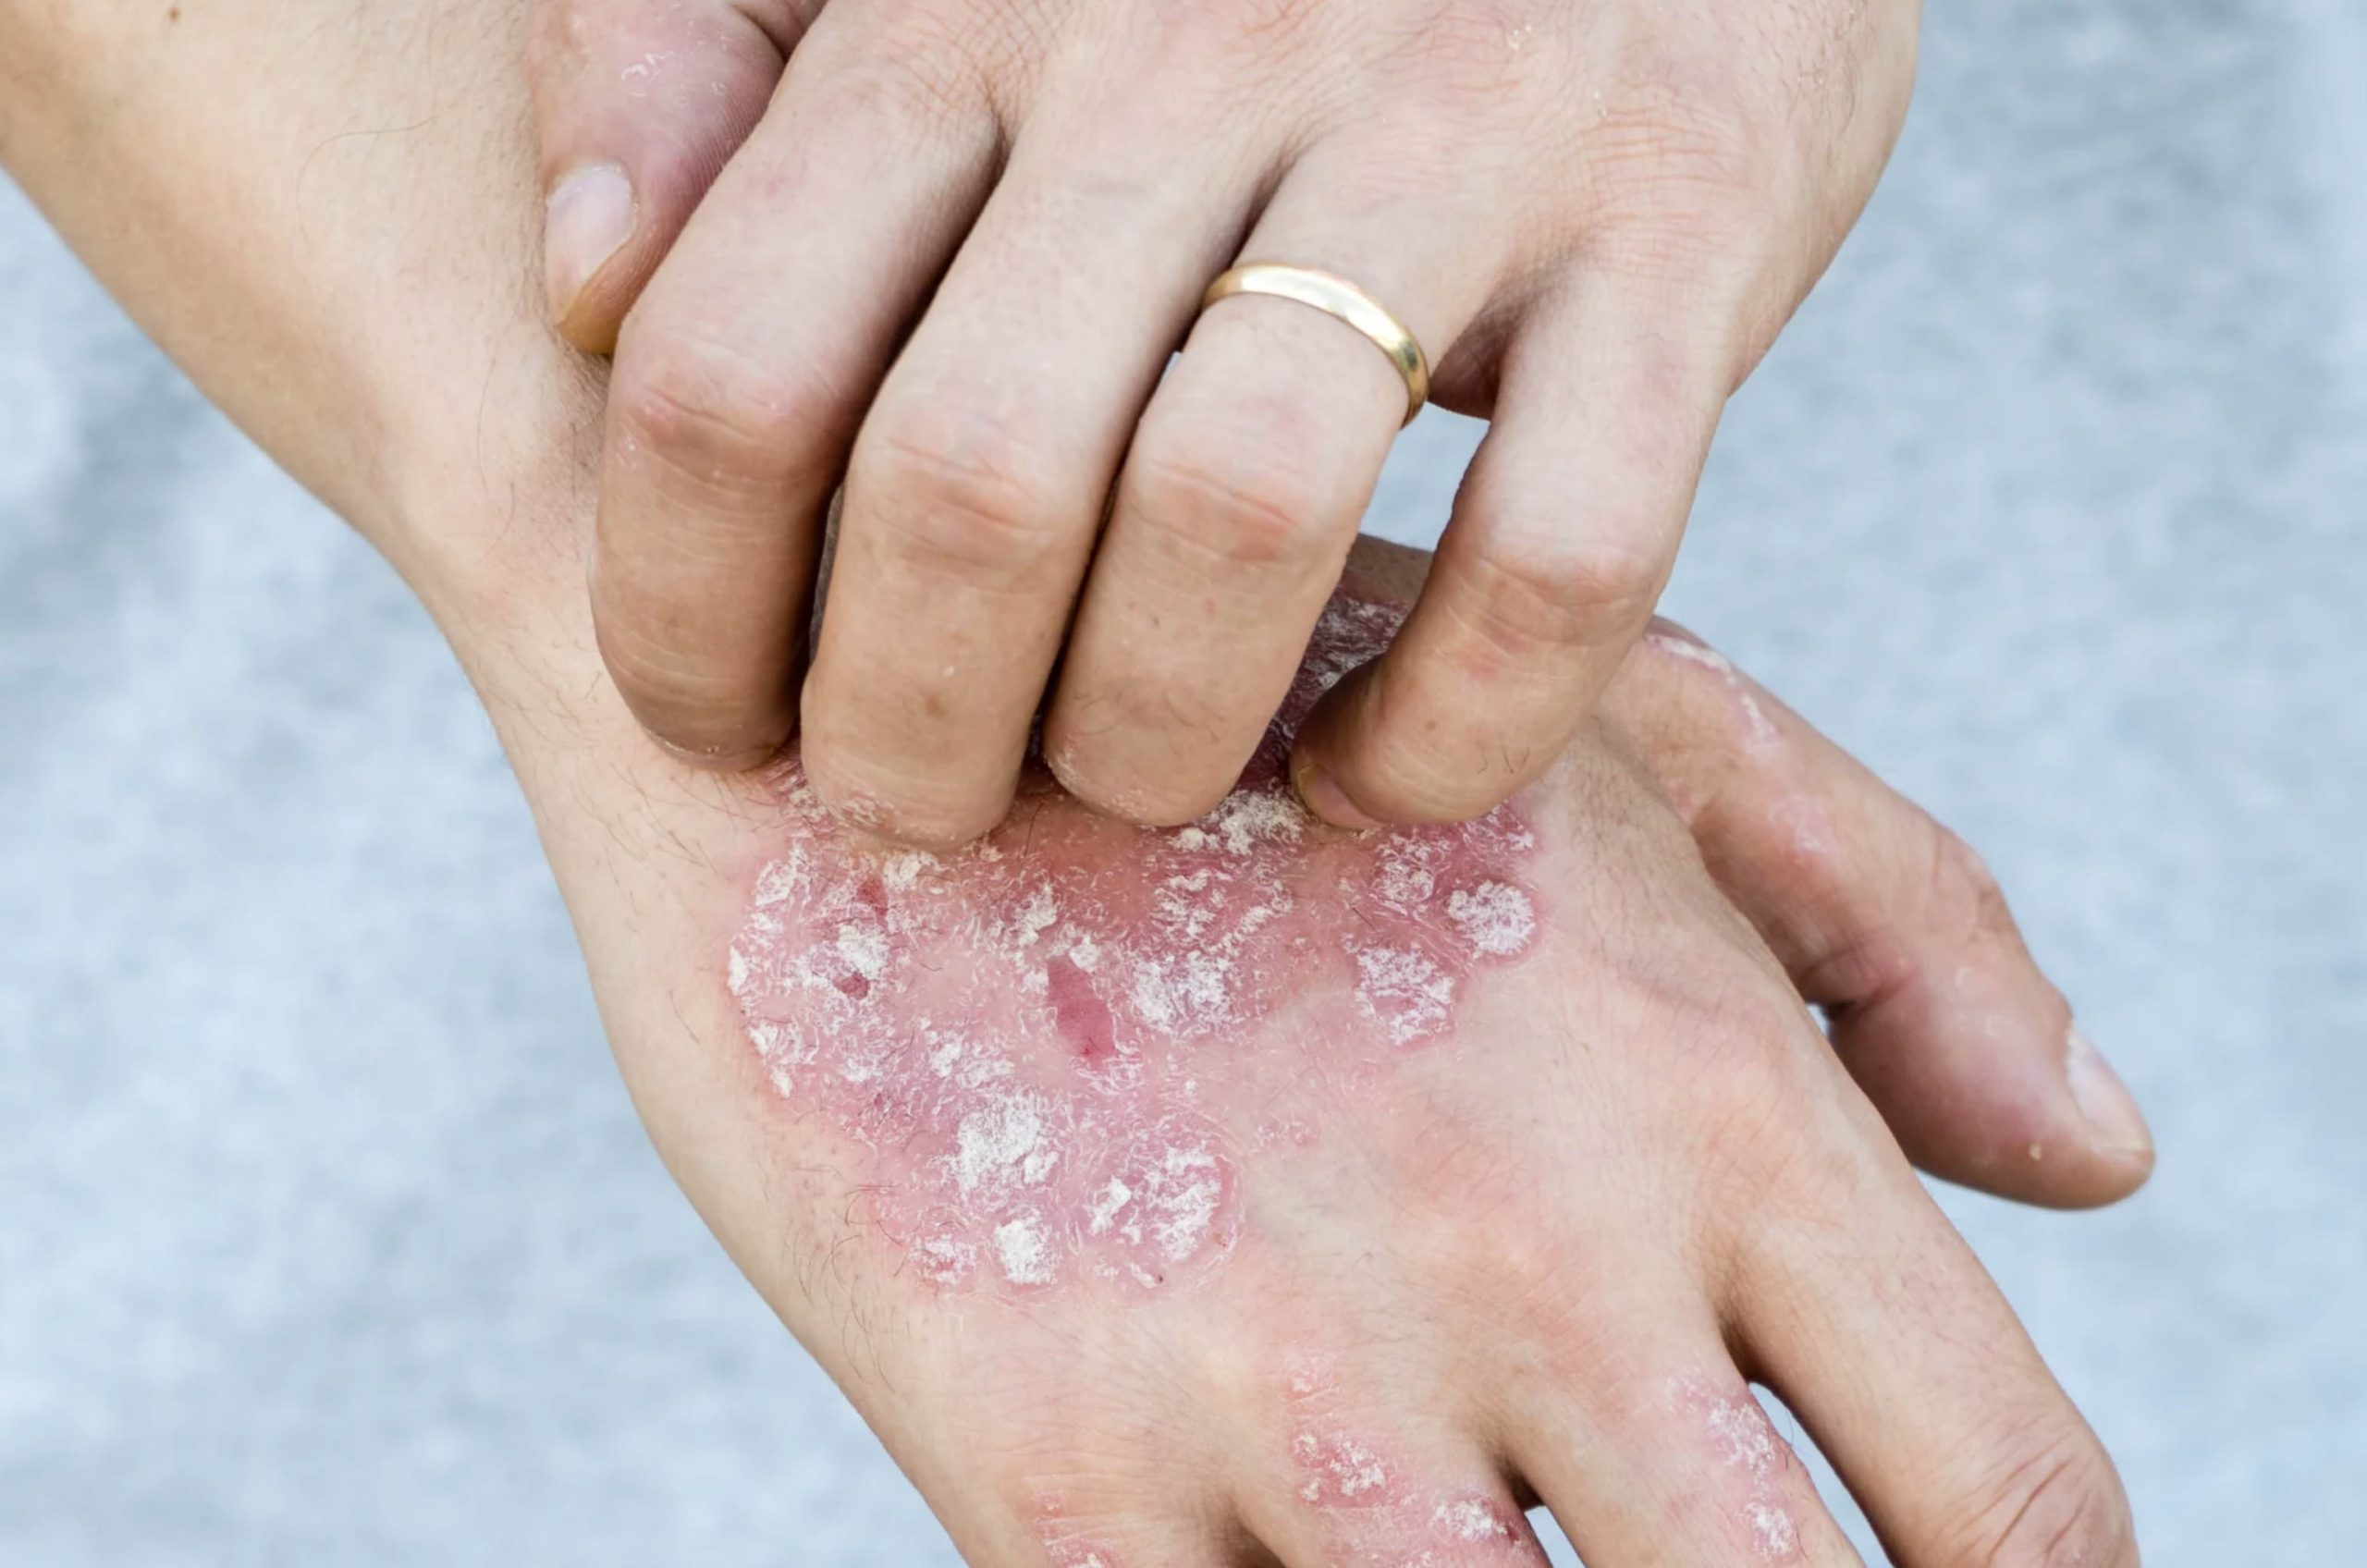 ACGrace - A person's hand with psoriasis on it.